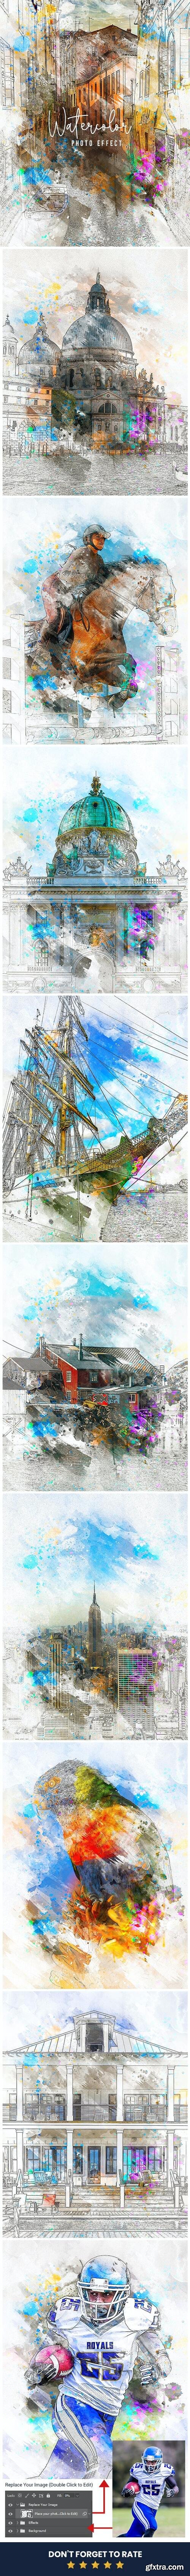 GraphicRiver - Watercolor & Sketch Painting Photoshop Mockup 40382570